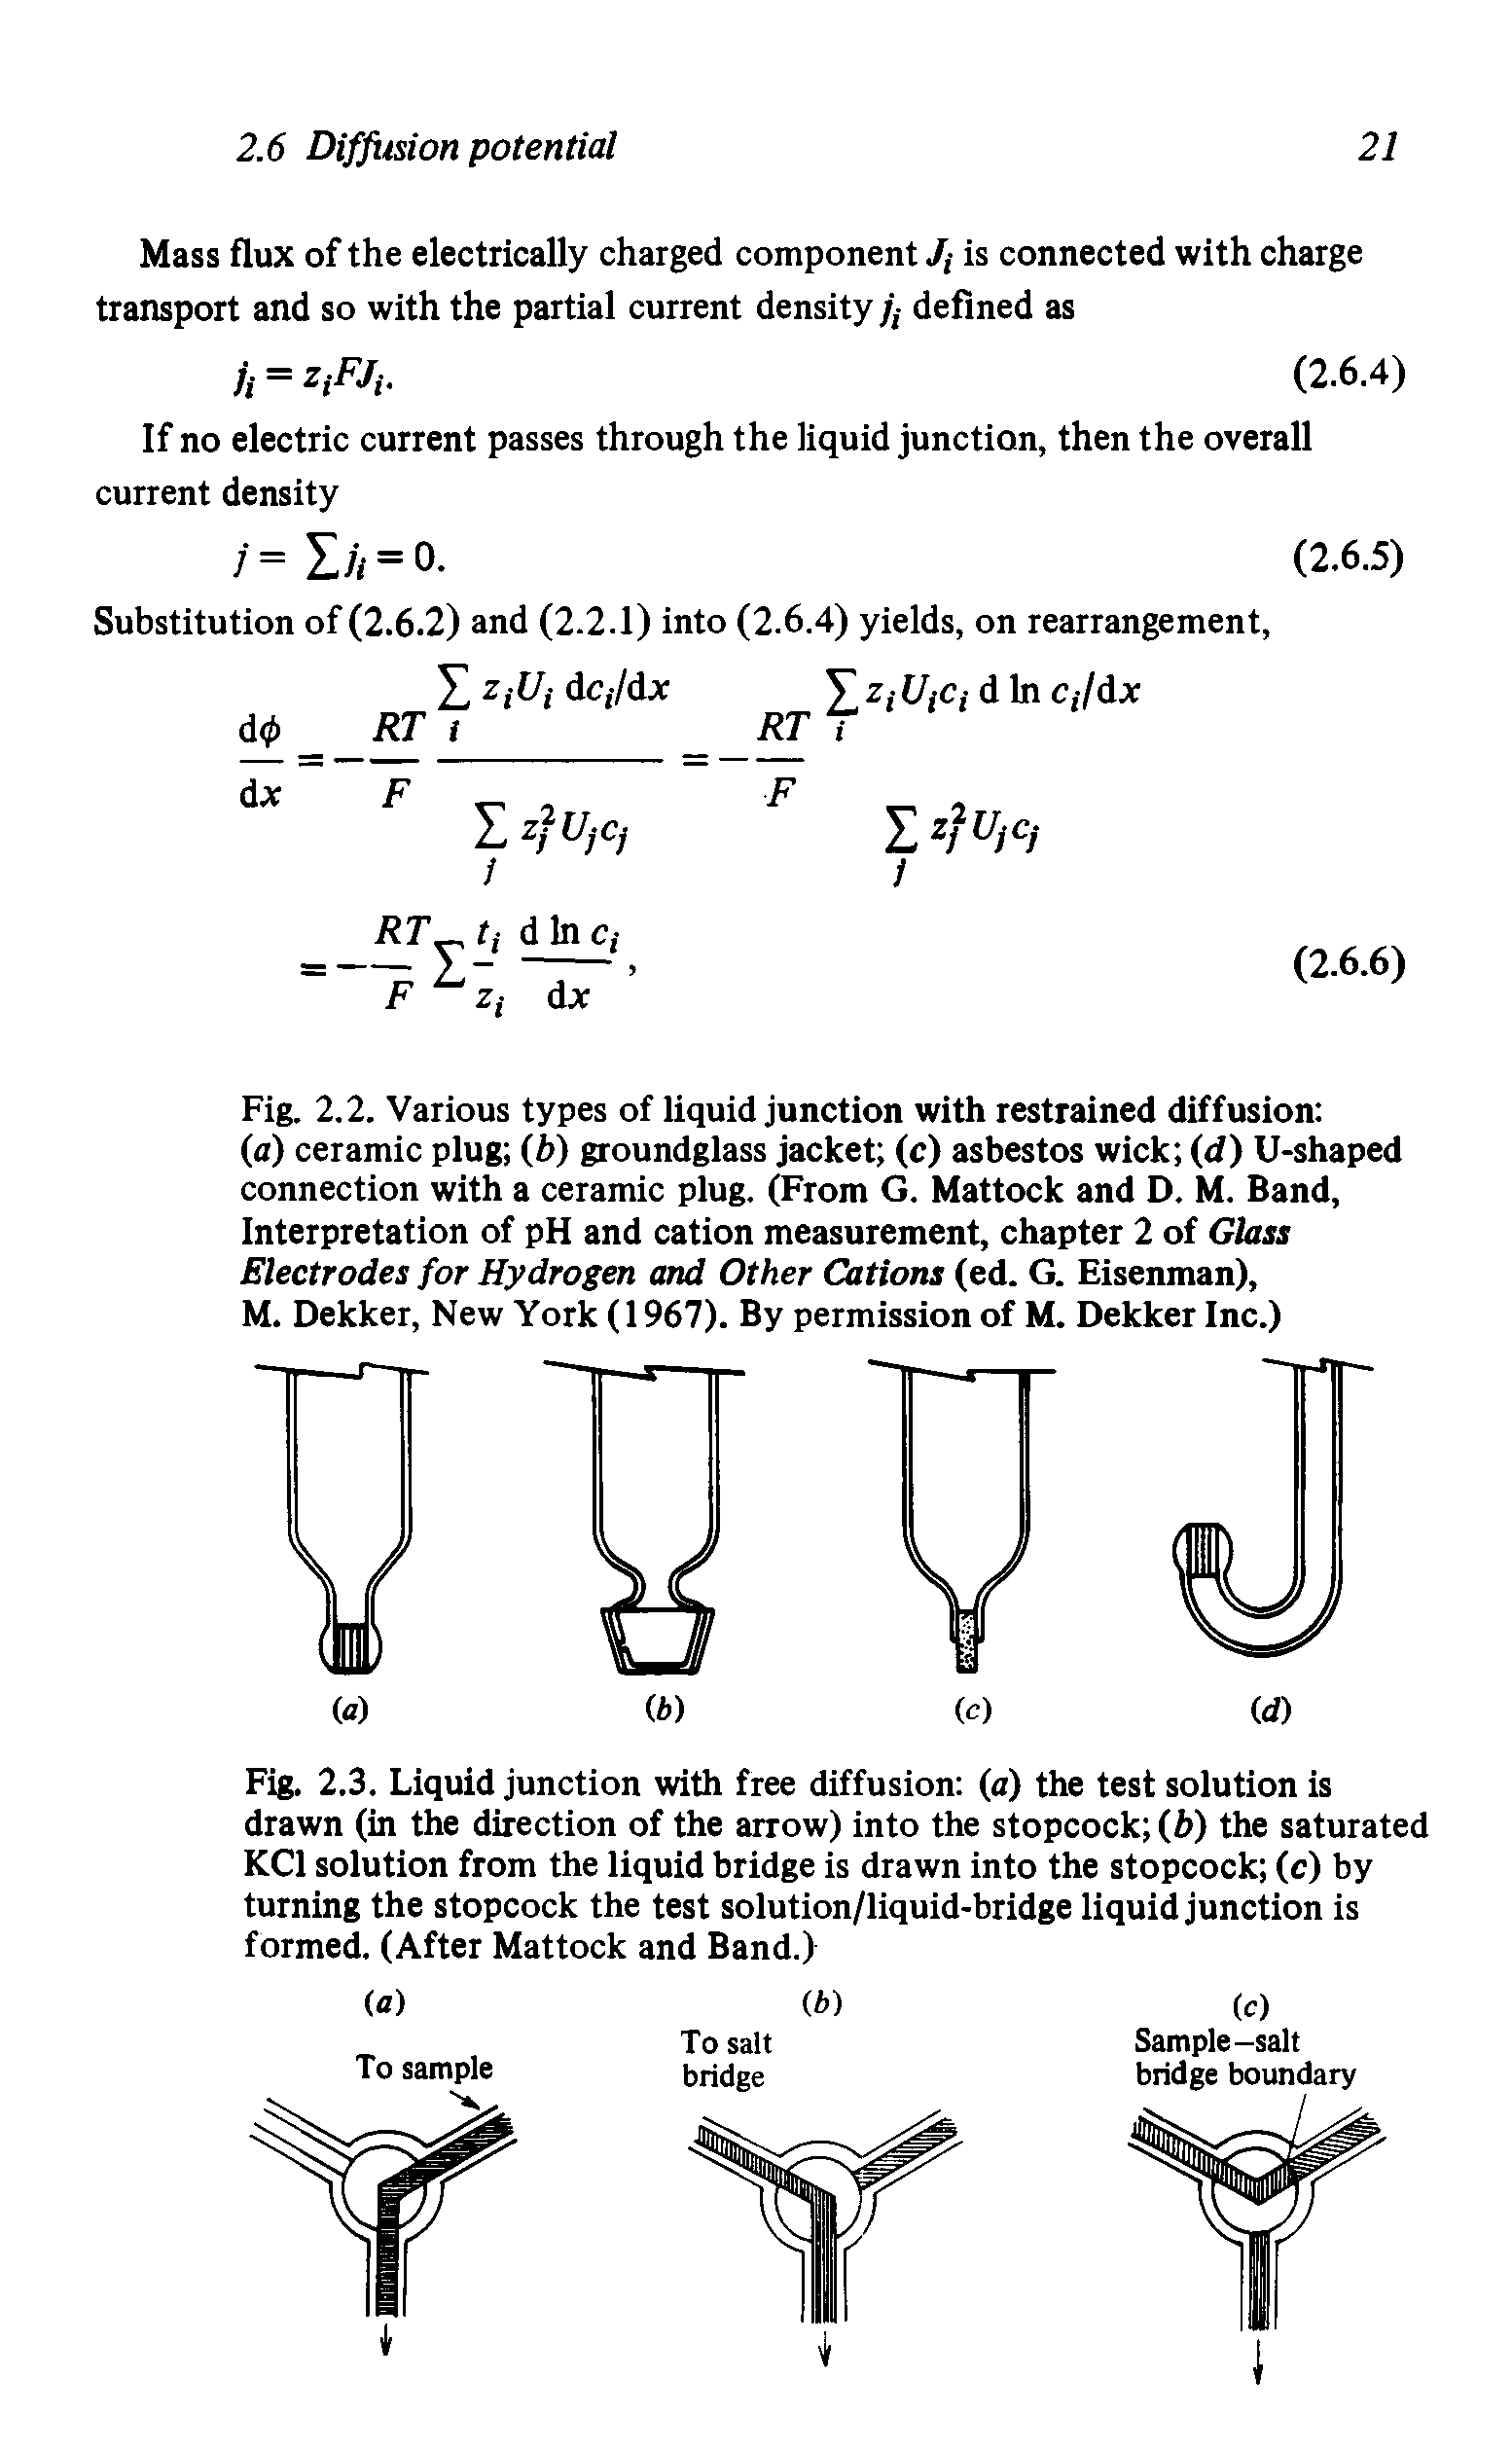 Fig. 2.3. Liquid junction with free diffusion (a) the test solution is drawn (in the direction of the arrow) into the stopcock (h) the saturated KCl solution from the liquid bridge is drawn into the stopcock (c) by turning the stopcock the test solution/liquid-bridge liquid junction is formed. (After Mattock and Band.)...